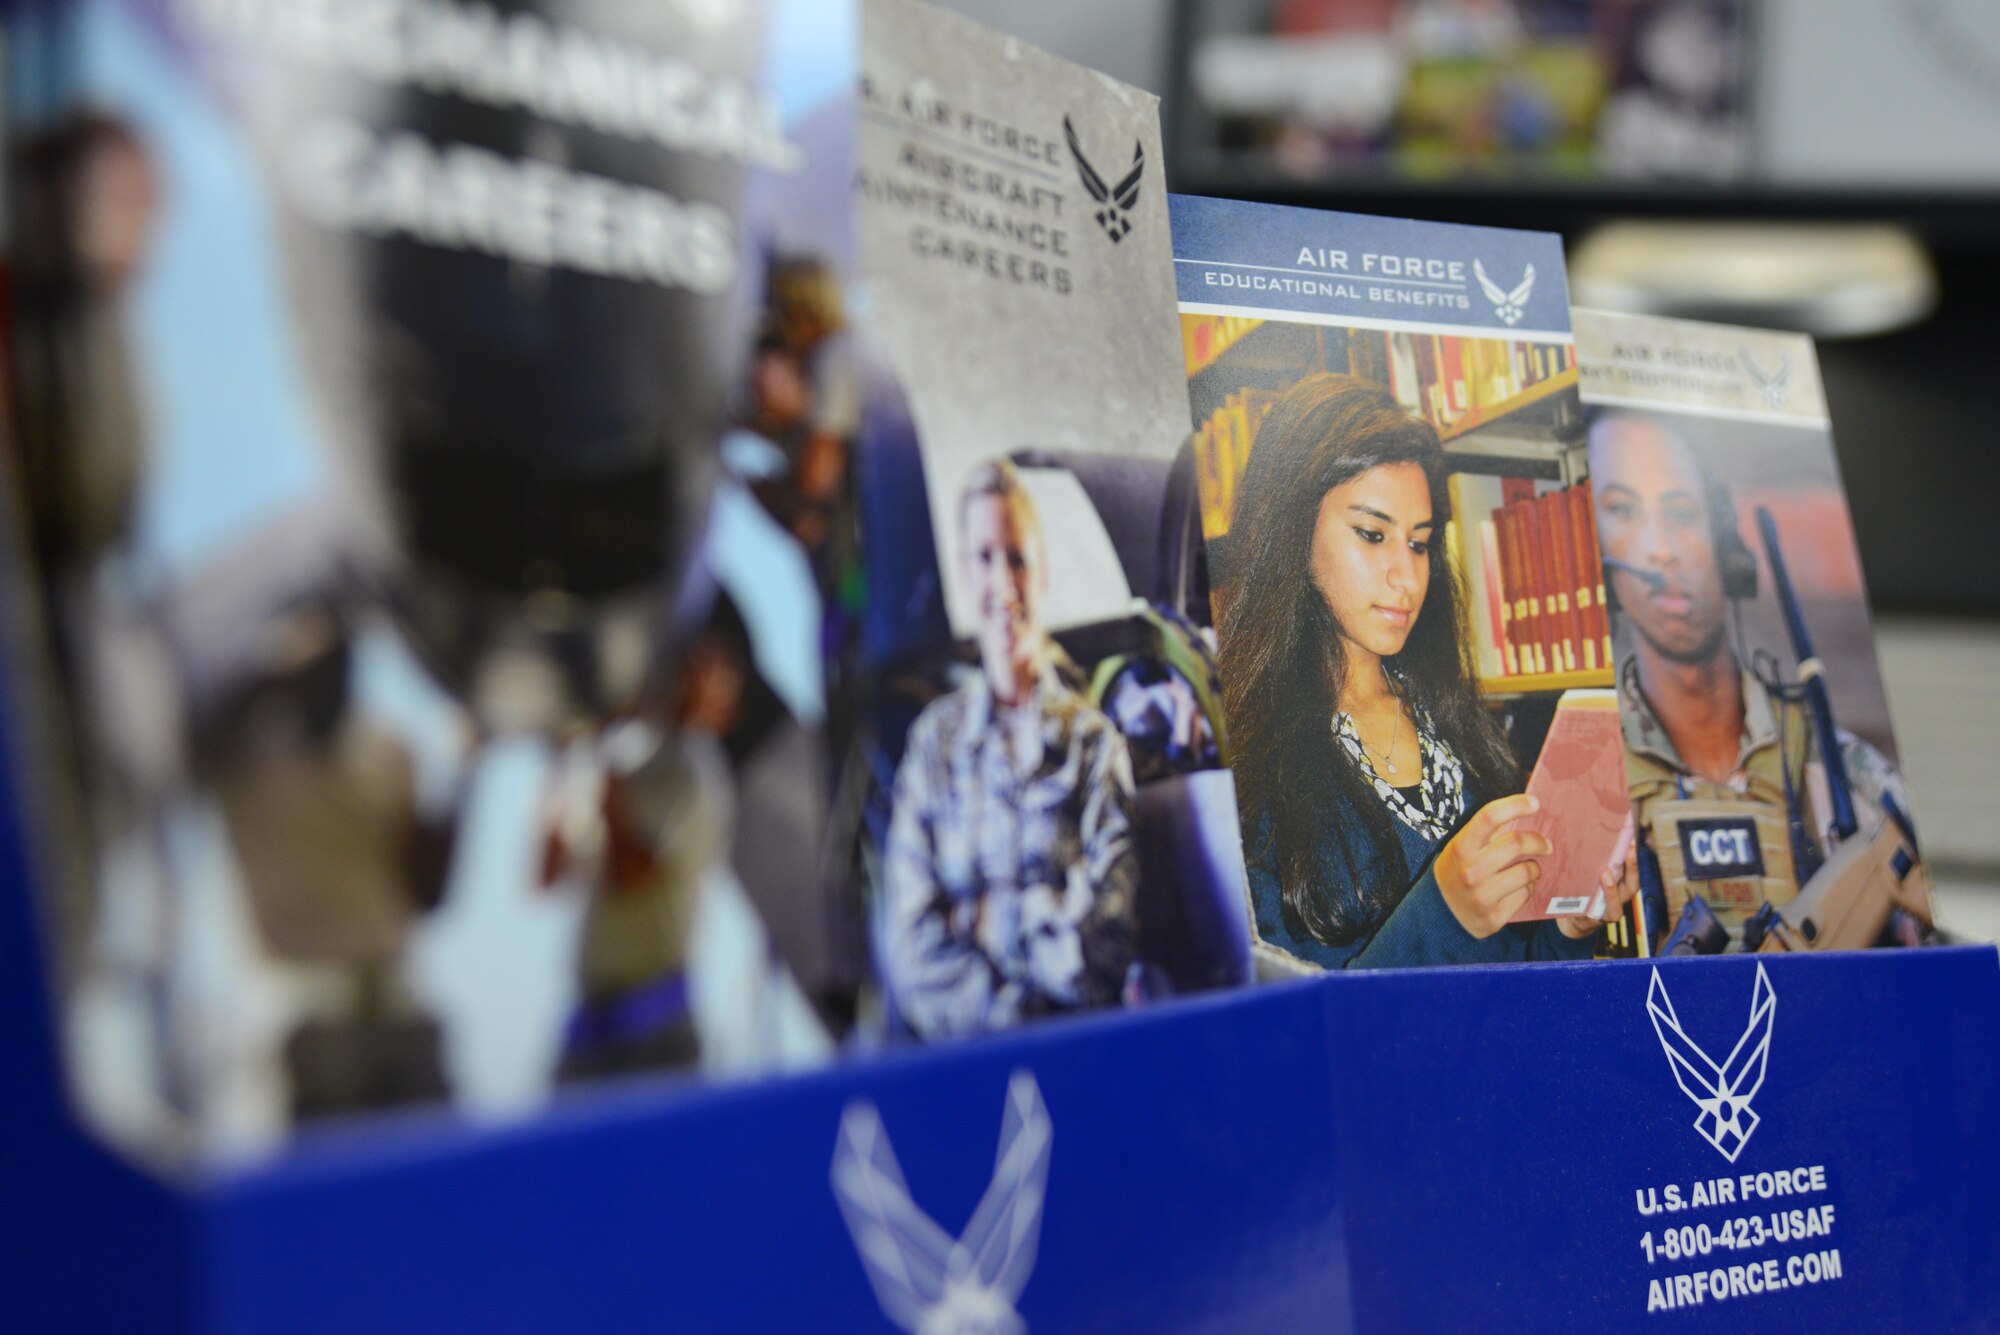 U.S. Air Force career brochures are displayed on an Air Force recruiter’s desk in a recruiting office at Sumter, S.C., April 14, 2017. The brochures provide information to potential Airmen about specific requirements for different career fields and what each field does regularly. (U.S. Air Force photo by Airman 1st Class Kathryn R.C. Reaves)